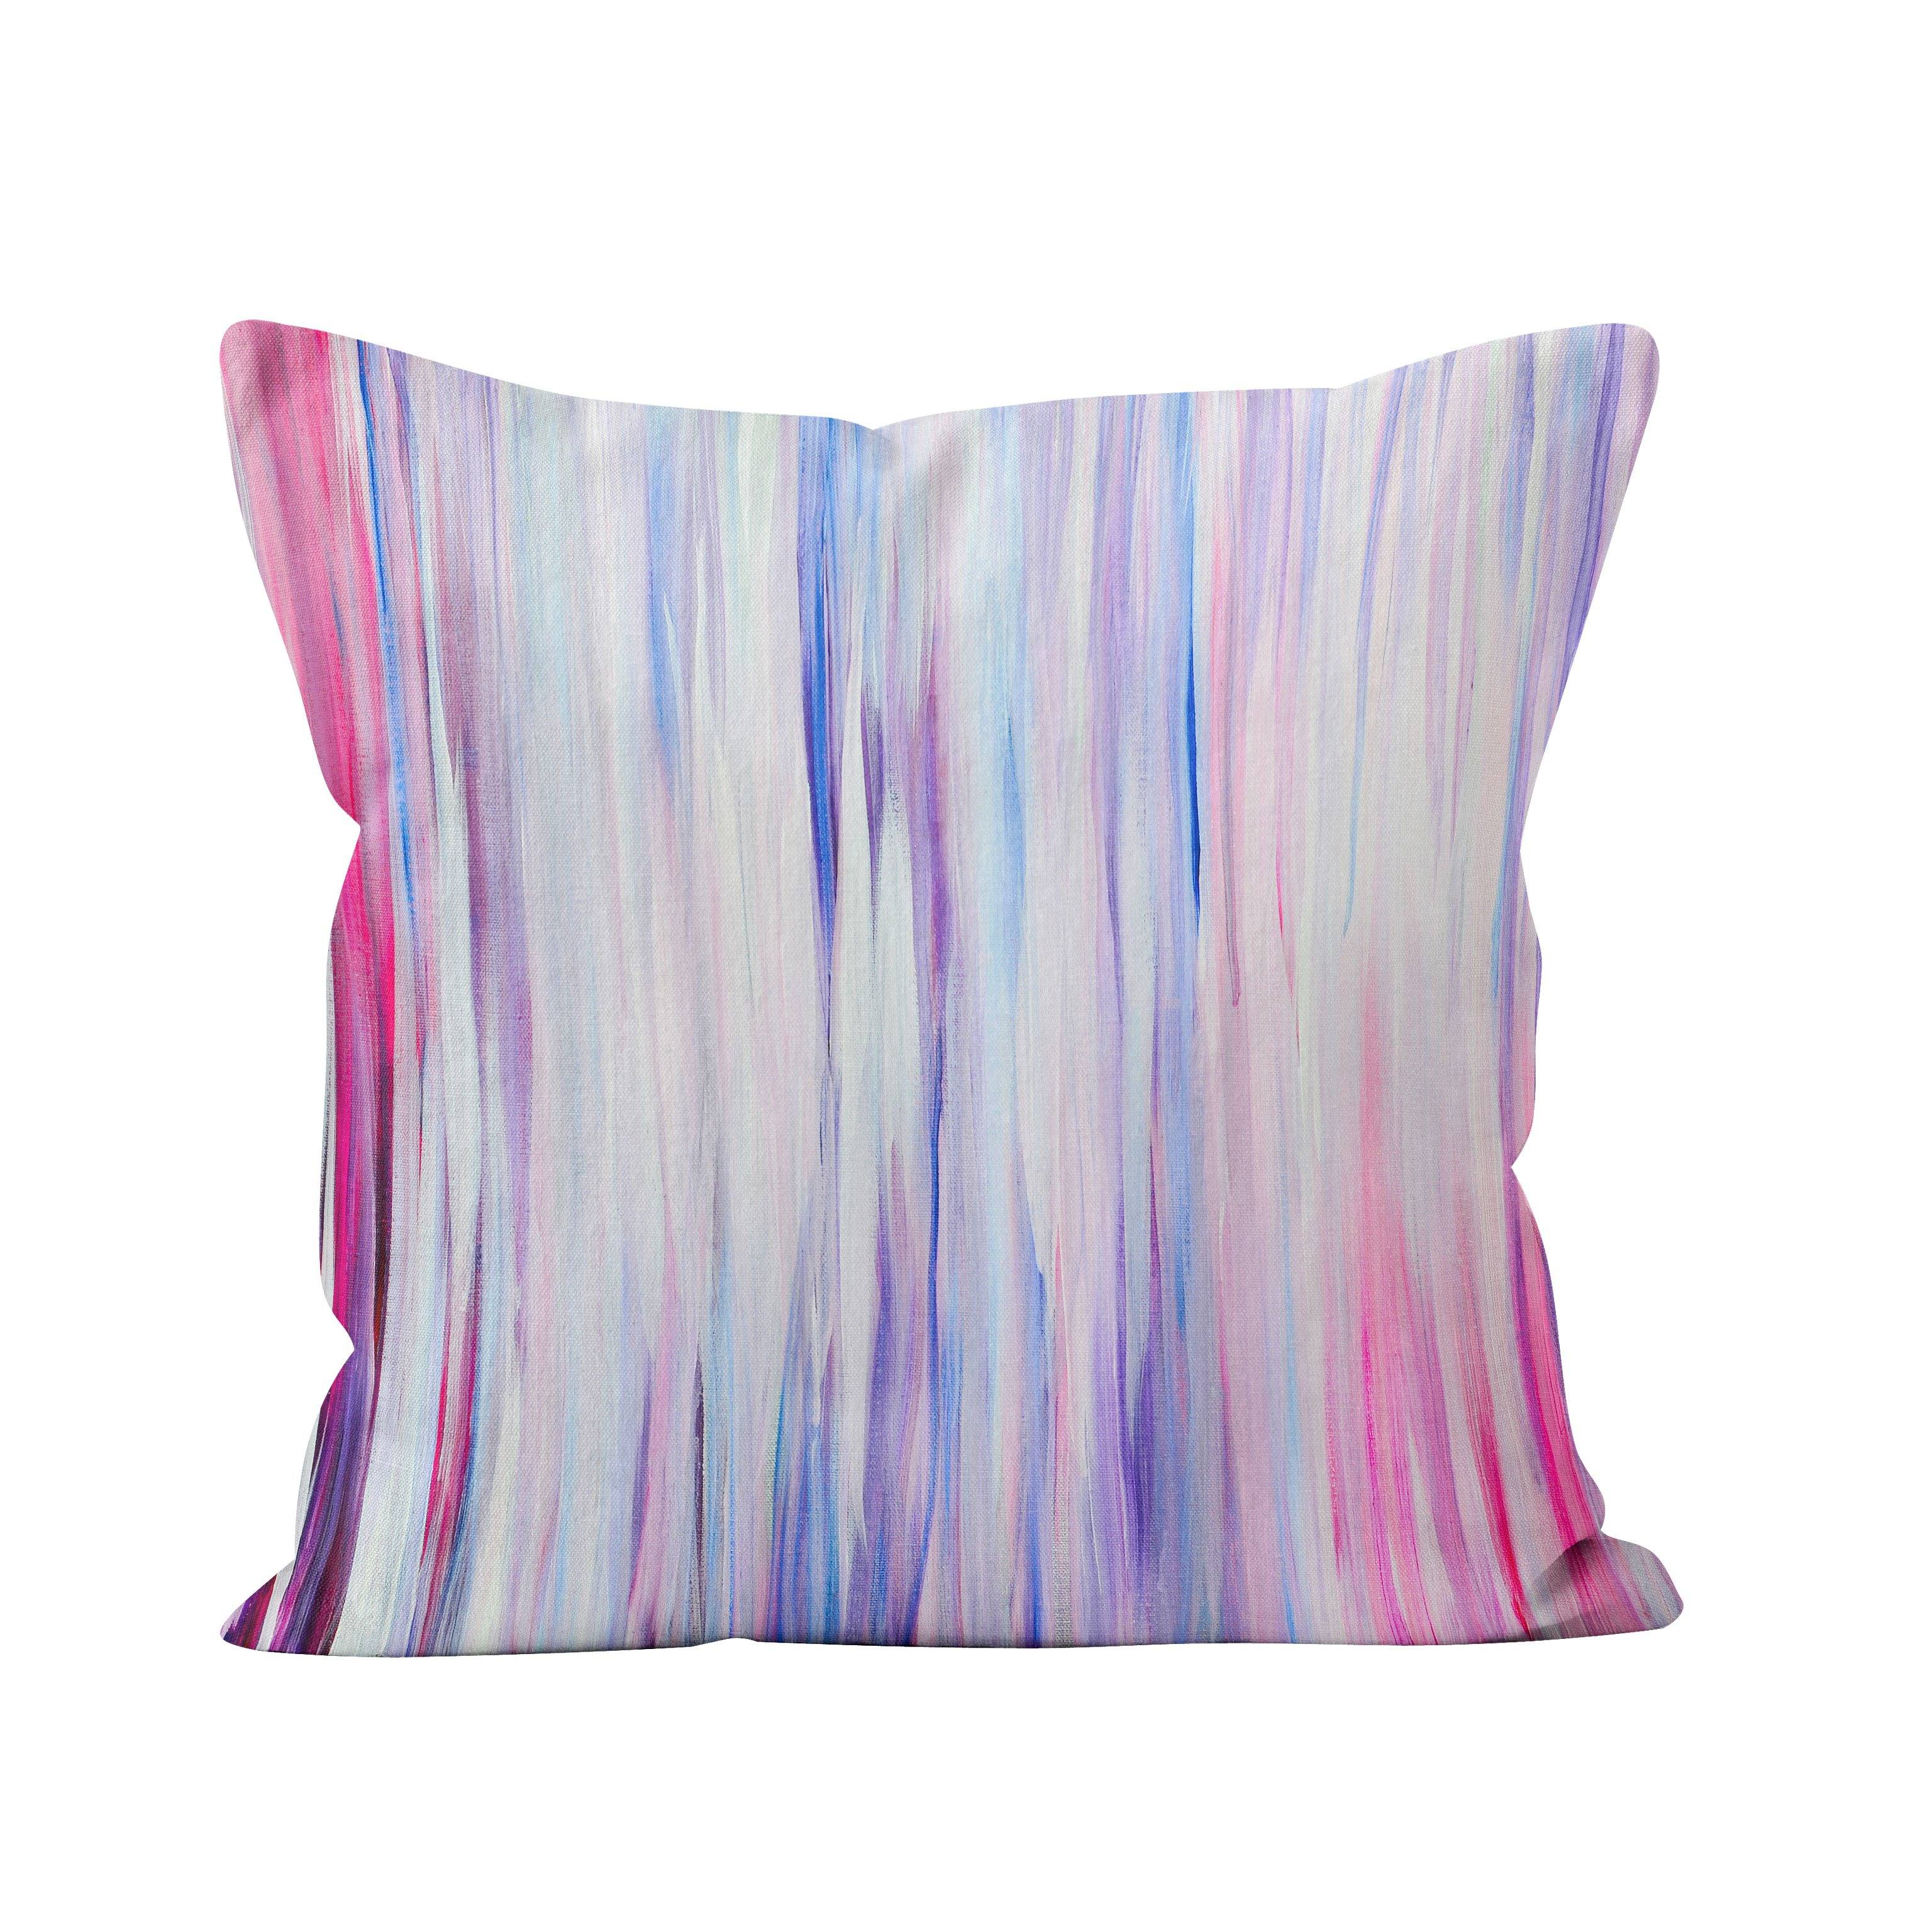 Candy Stripes Cushion - Louise Mead